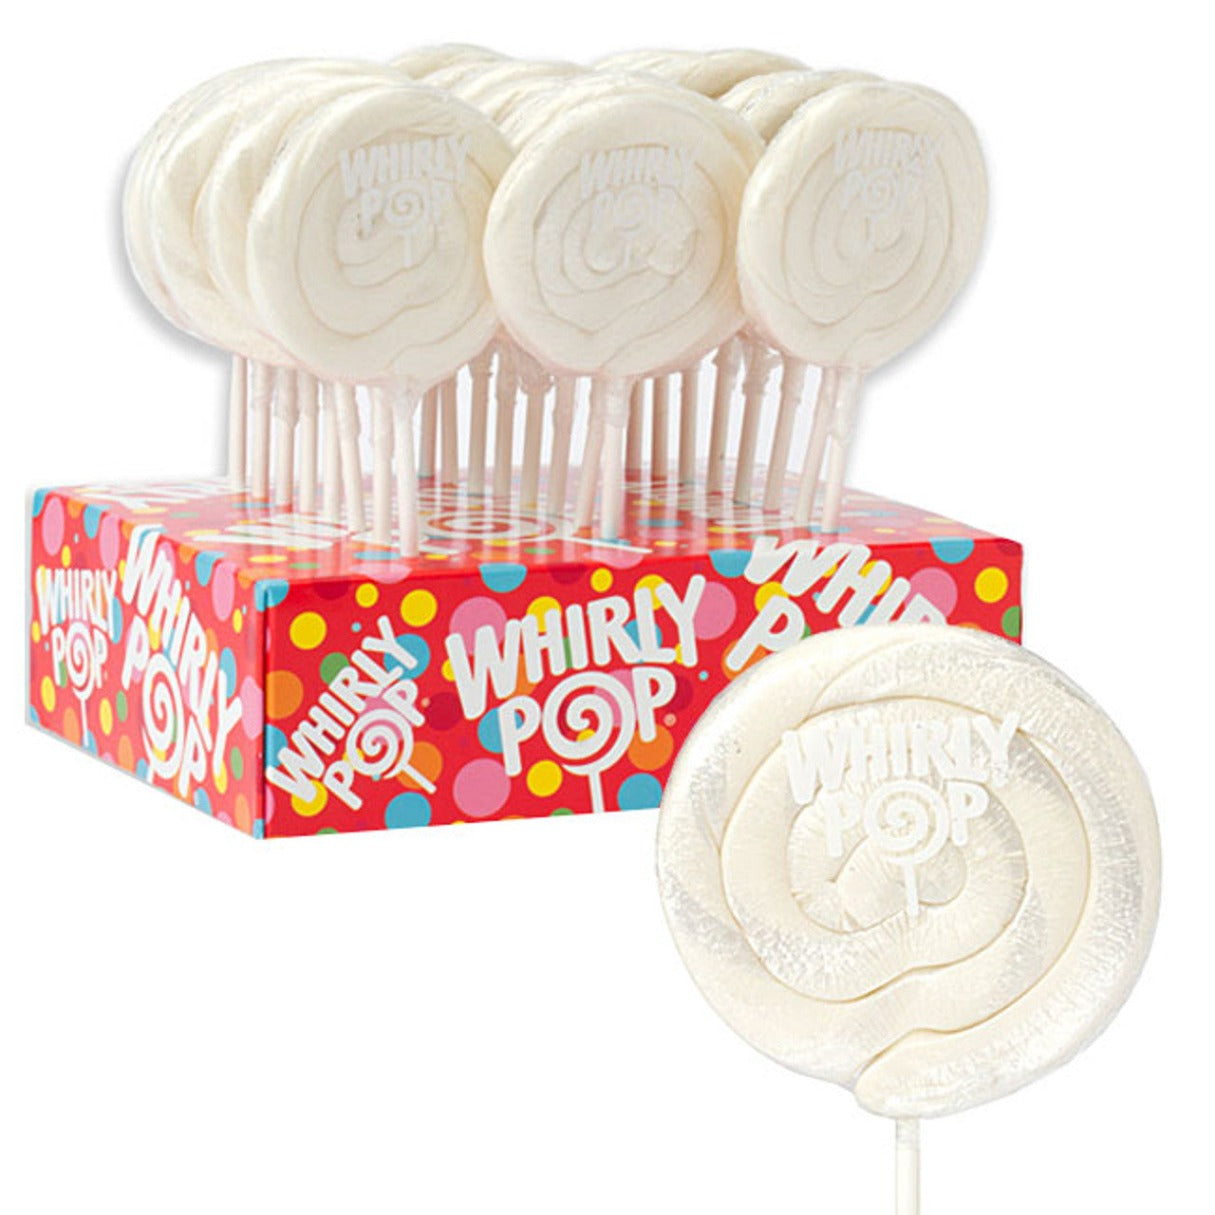 Whirly Pops White 1.5oz - 24ct